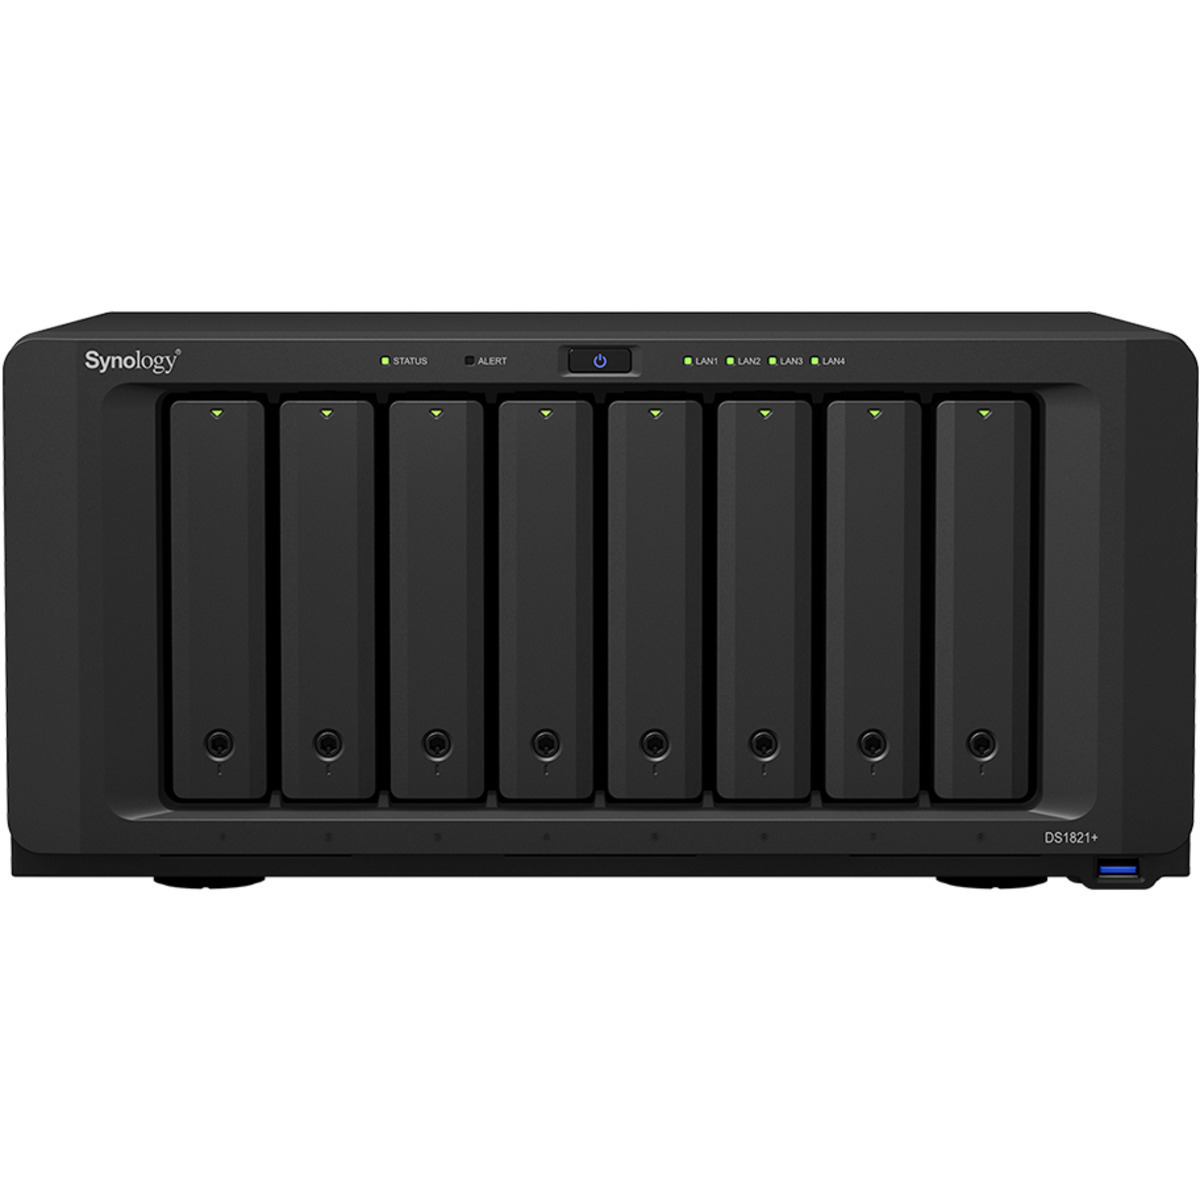 buy Synology DiskStation DS1821+ 48tb Desktop NAS - Network Attached Storage Device 8x6000gb Western Digital Red WD60EFAX 3.5 5400rpm SATA 6Gb/s HDD NAS Class Drives Installed - Burn-In Tested - ON SALE - FREE RAM UPGRADE - nas headquarters buy network attached storage server device das new raid-5 free shipping simply usa DiskStation DS1821+